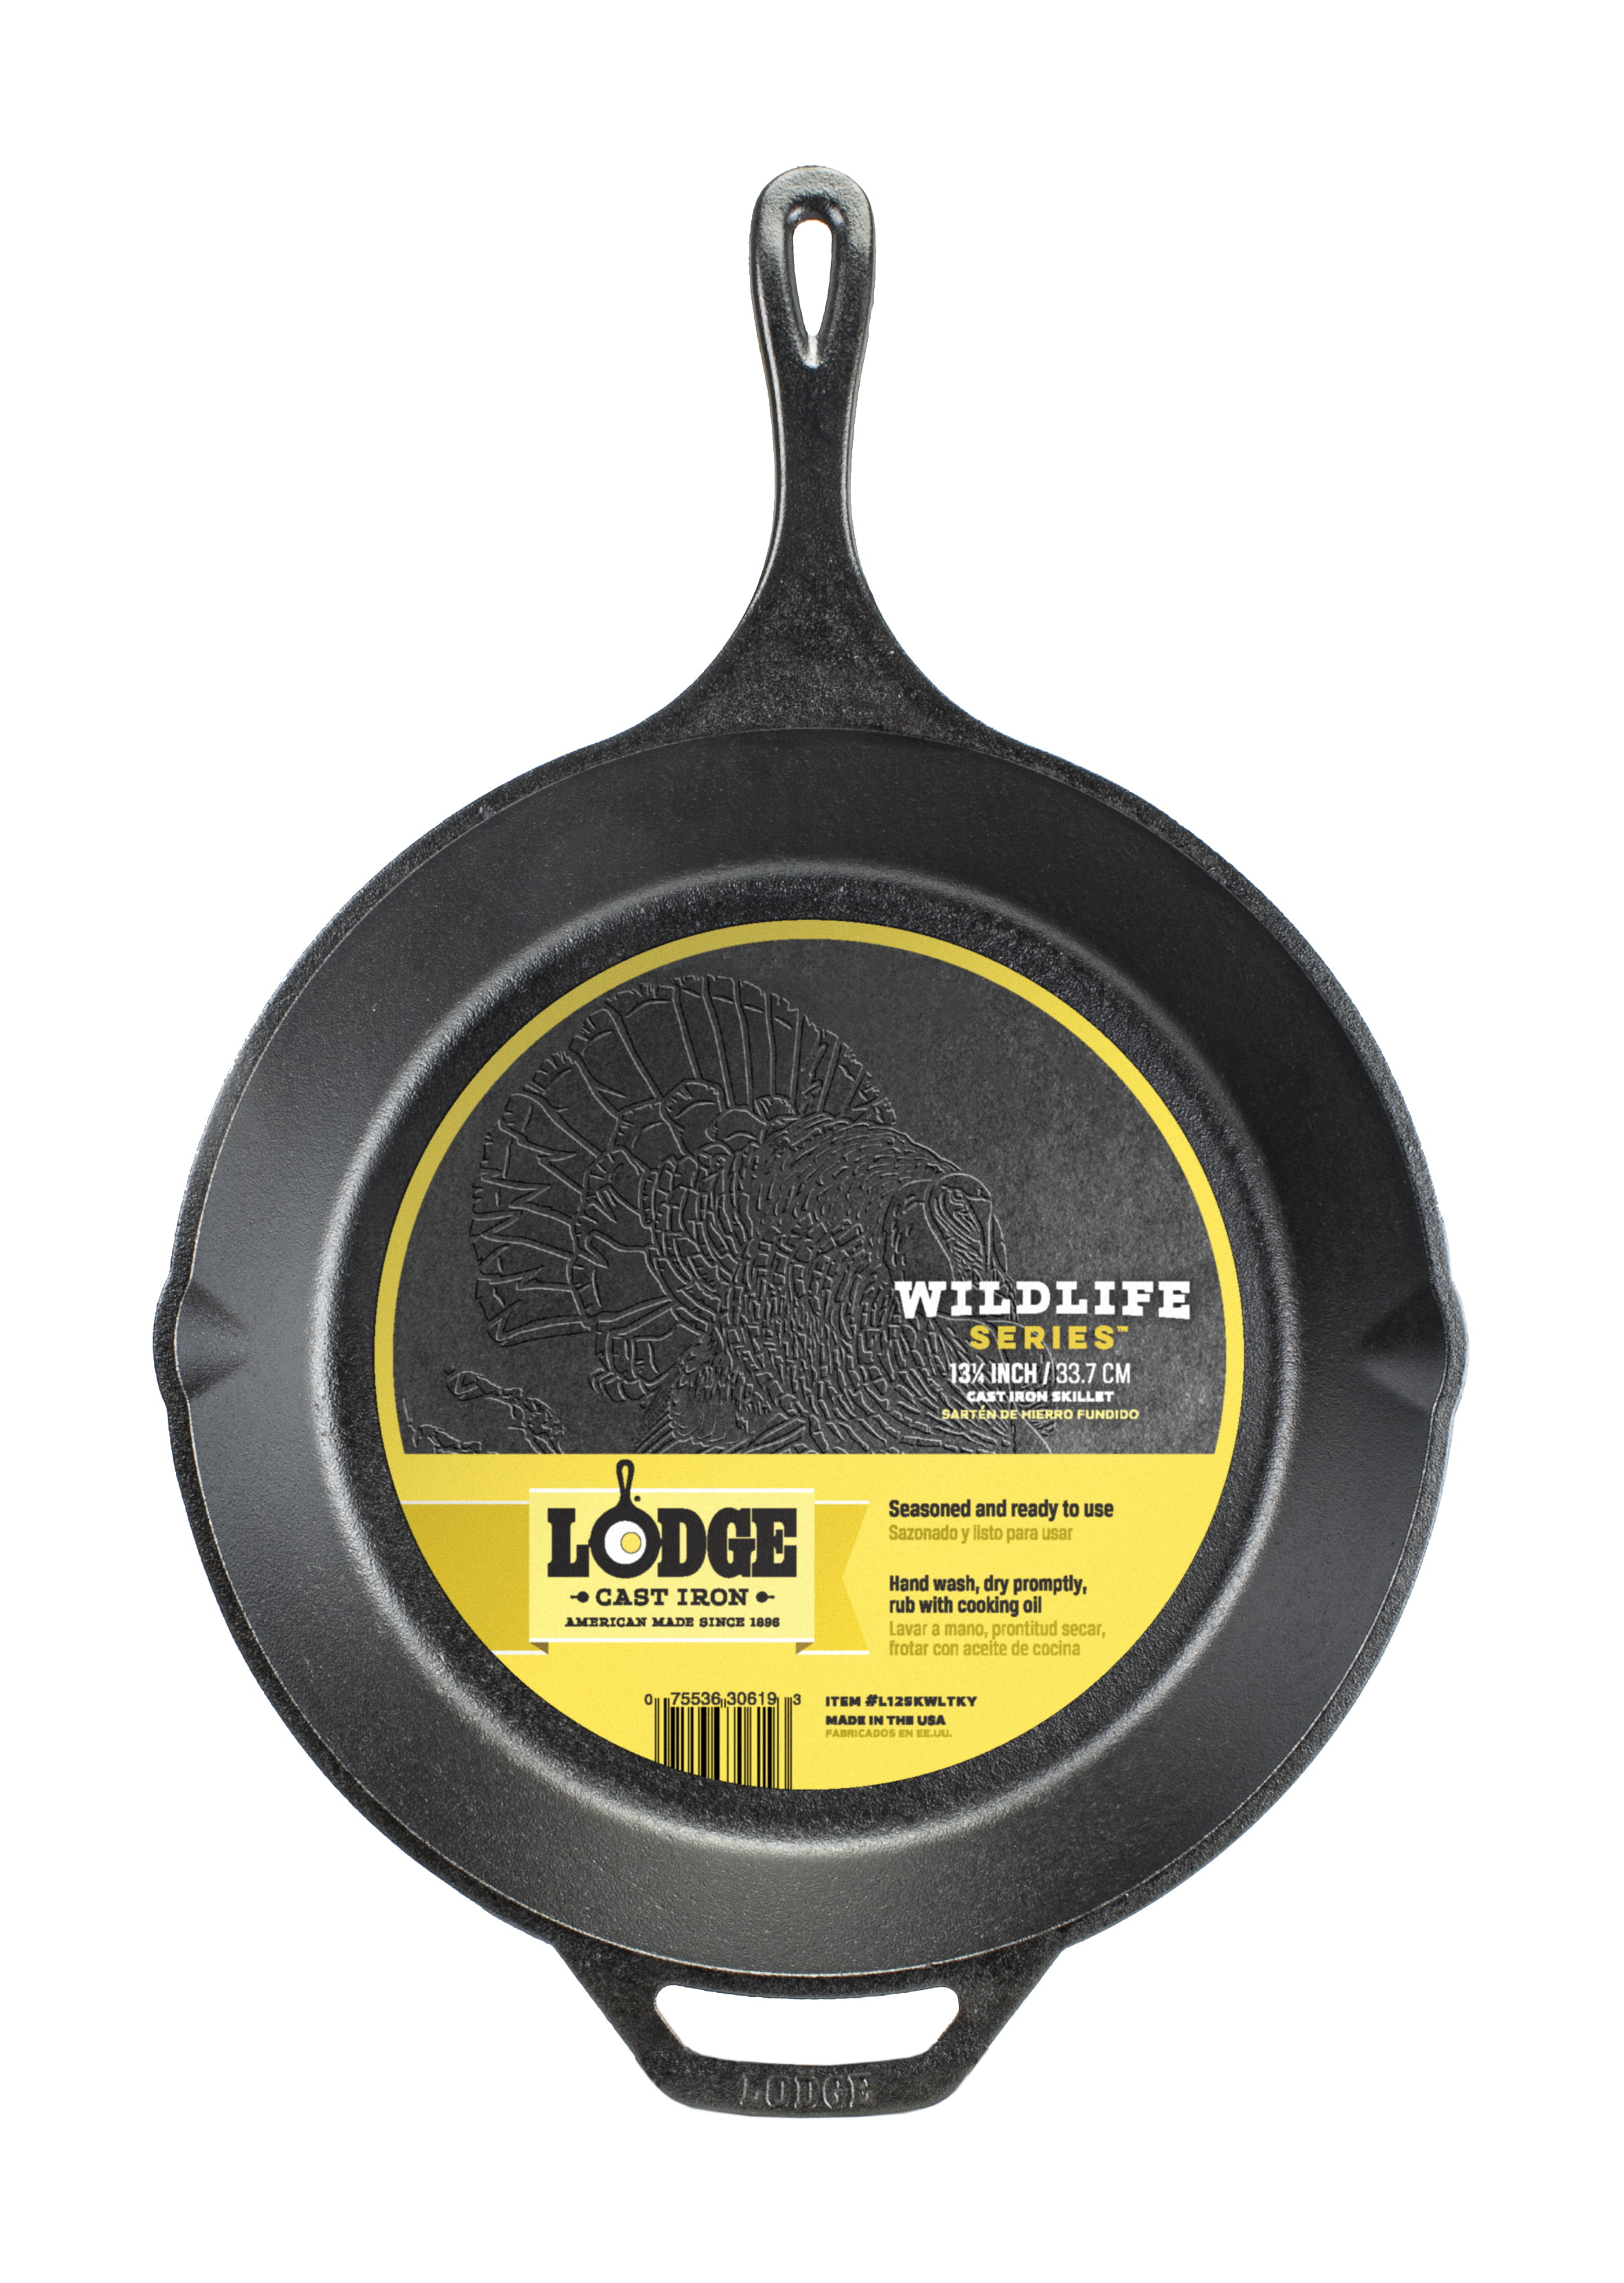 Lodge Cast Iron - Celebrate cooking outdoors with 15% off the Wildlife  Series! 🔥 Now through June 6. Use code WILDLIFE15 at checkout. Shop now